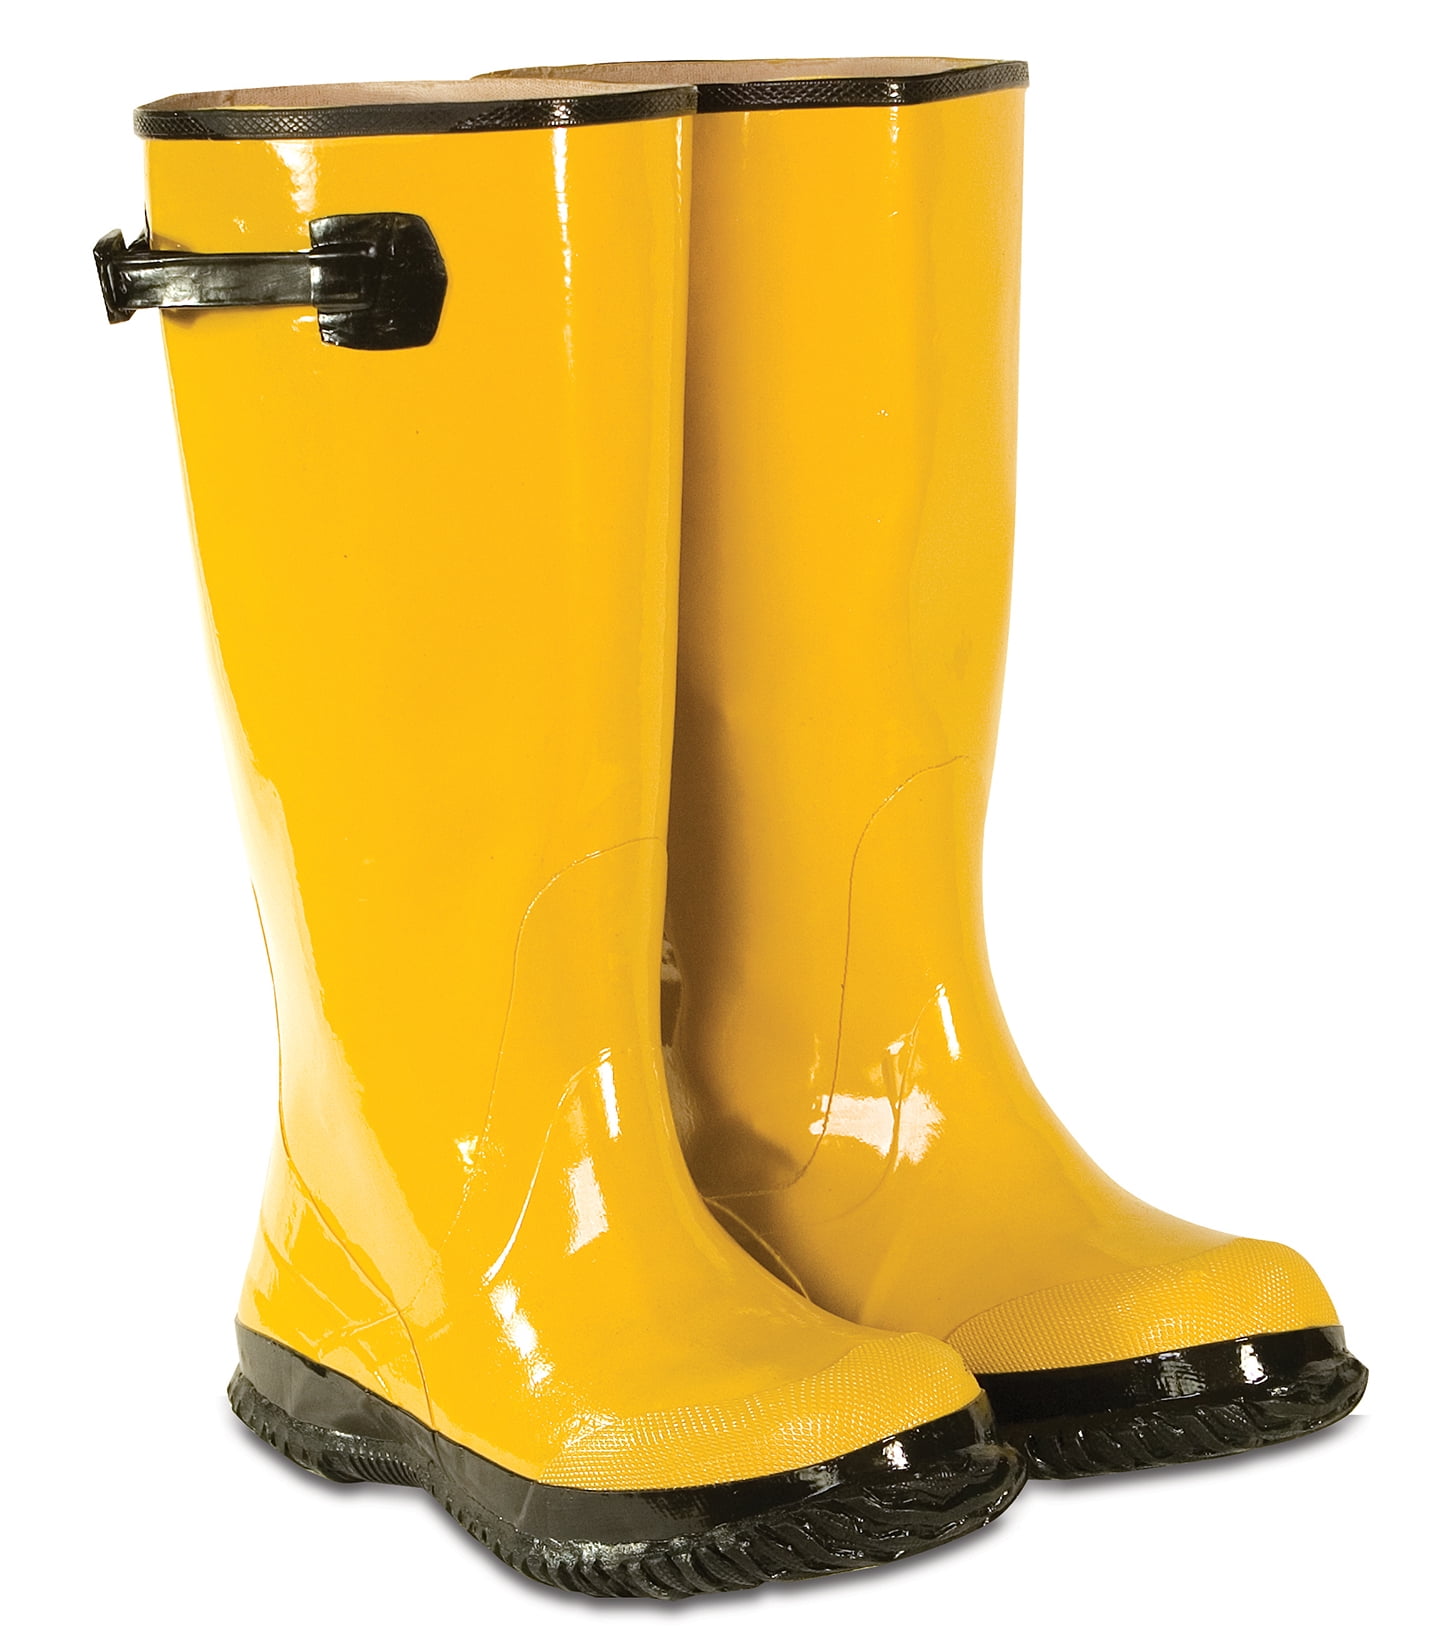 West Chester Over-the-Shoe Rubber Slush Boot Size 10 82000-10 Construction Work